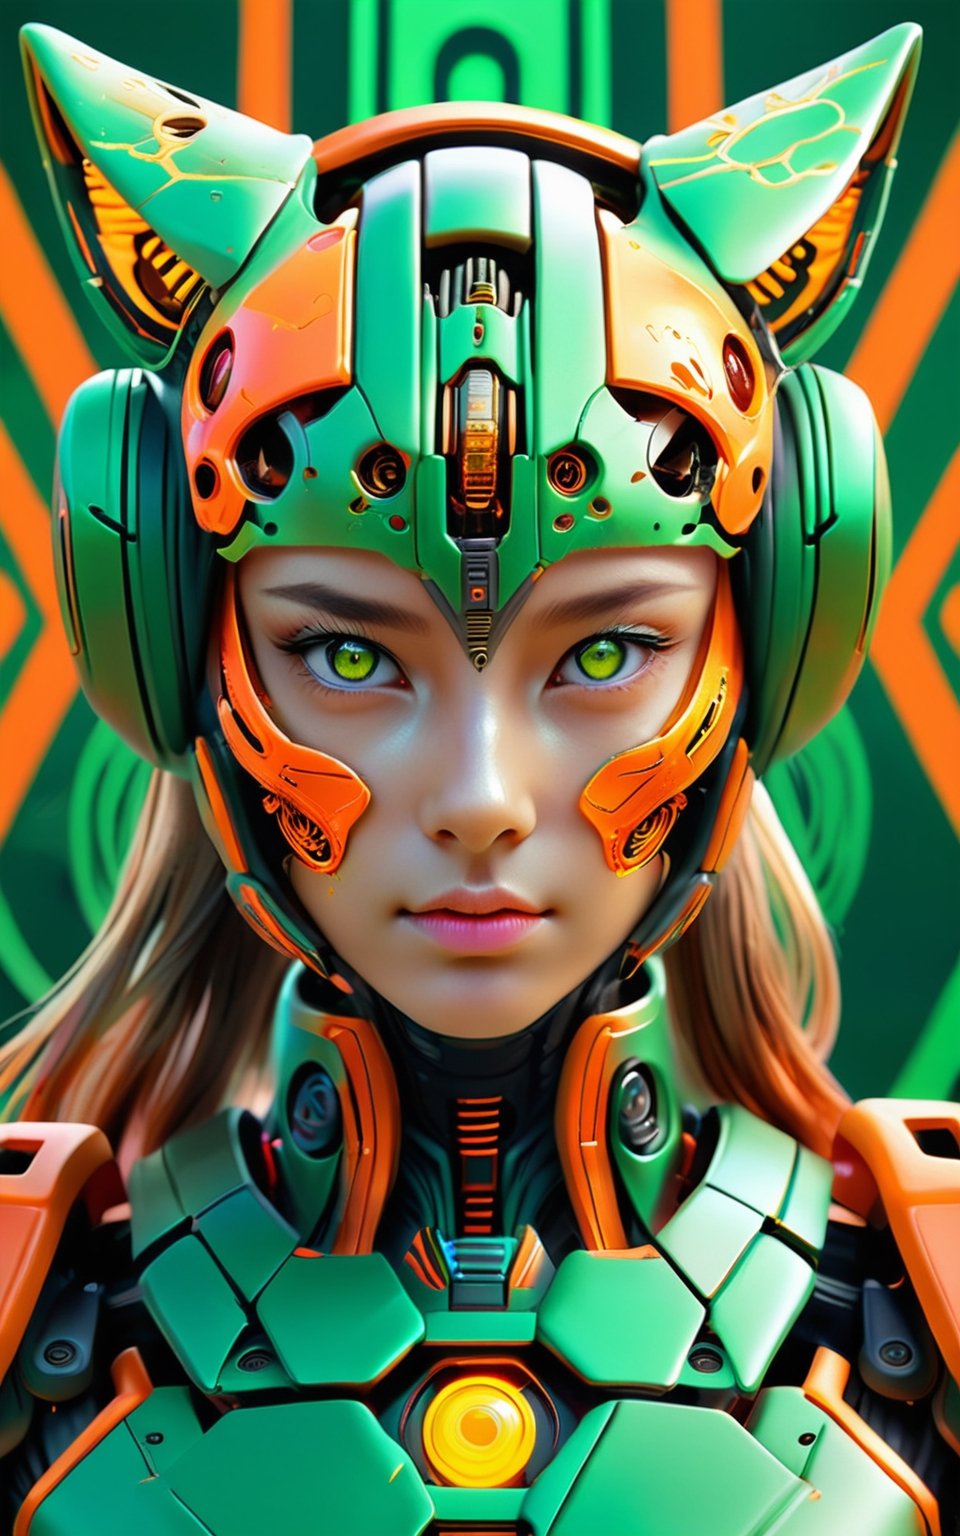 Tiger tennis player in tennis court, (masterpiece:1.1), (highest quality:1.1), (HDR:1.0), extreme quality, cg, (negative space), detailed face+eyes, 1girl, fox ears, (plants:1.18), (fractal art), (bright colors), splashes of color background, colors mashing, paint splatter, complimentary colors, neon, compassionate, electric, limited palette, synthwave, fine art, tan skin, full body, (green and orange:1.2), time stop, sy3, SMM,photo r3al,mecha,DonMCyb3rN3cr0XL 